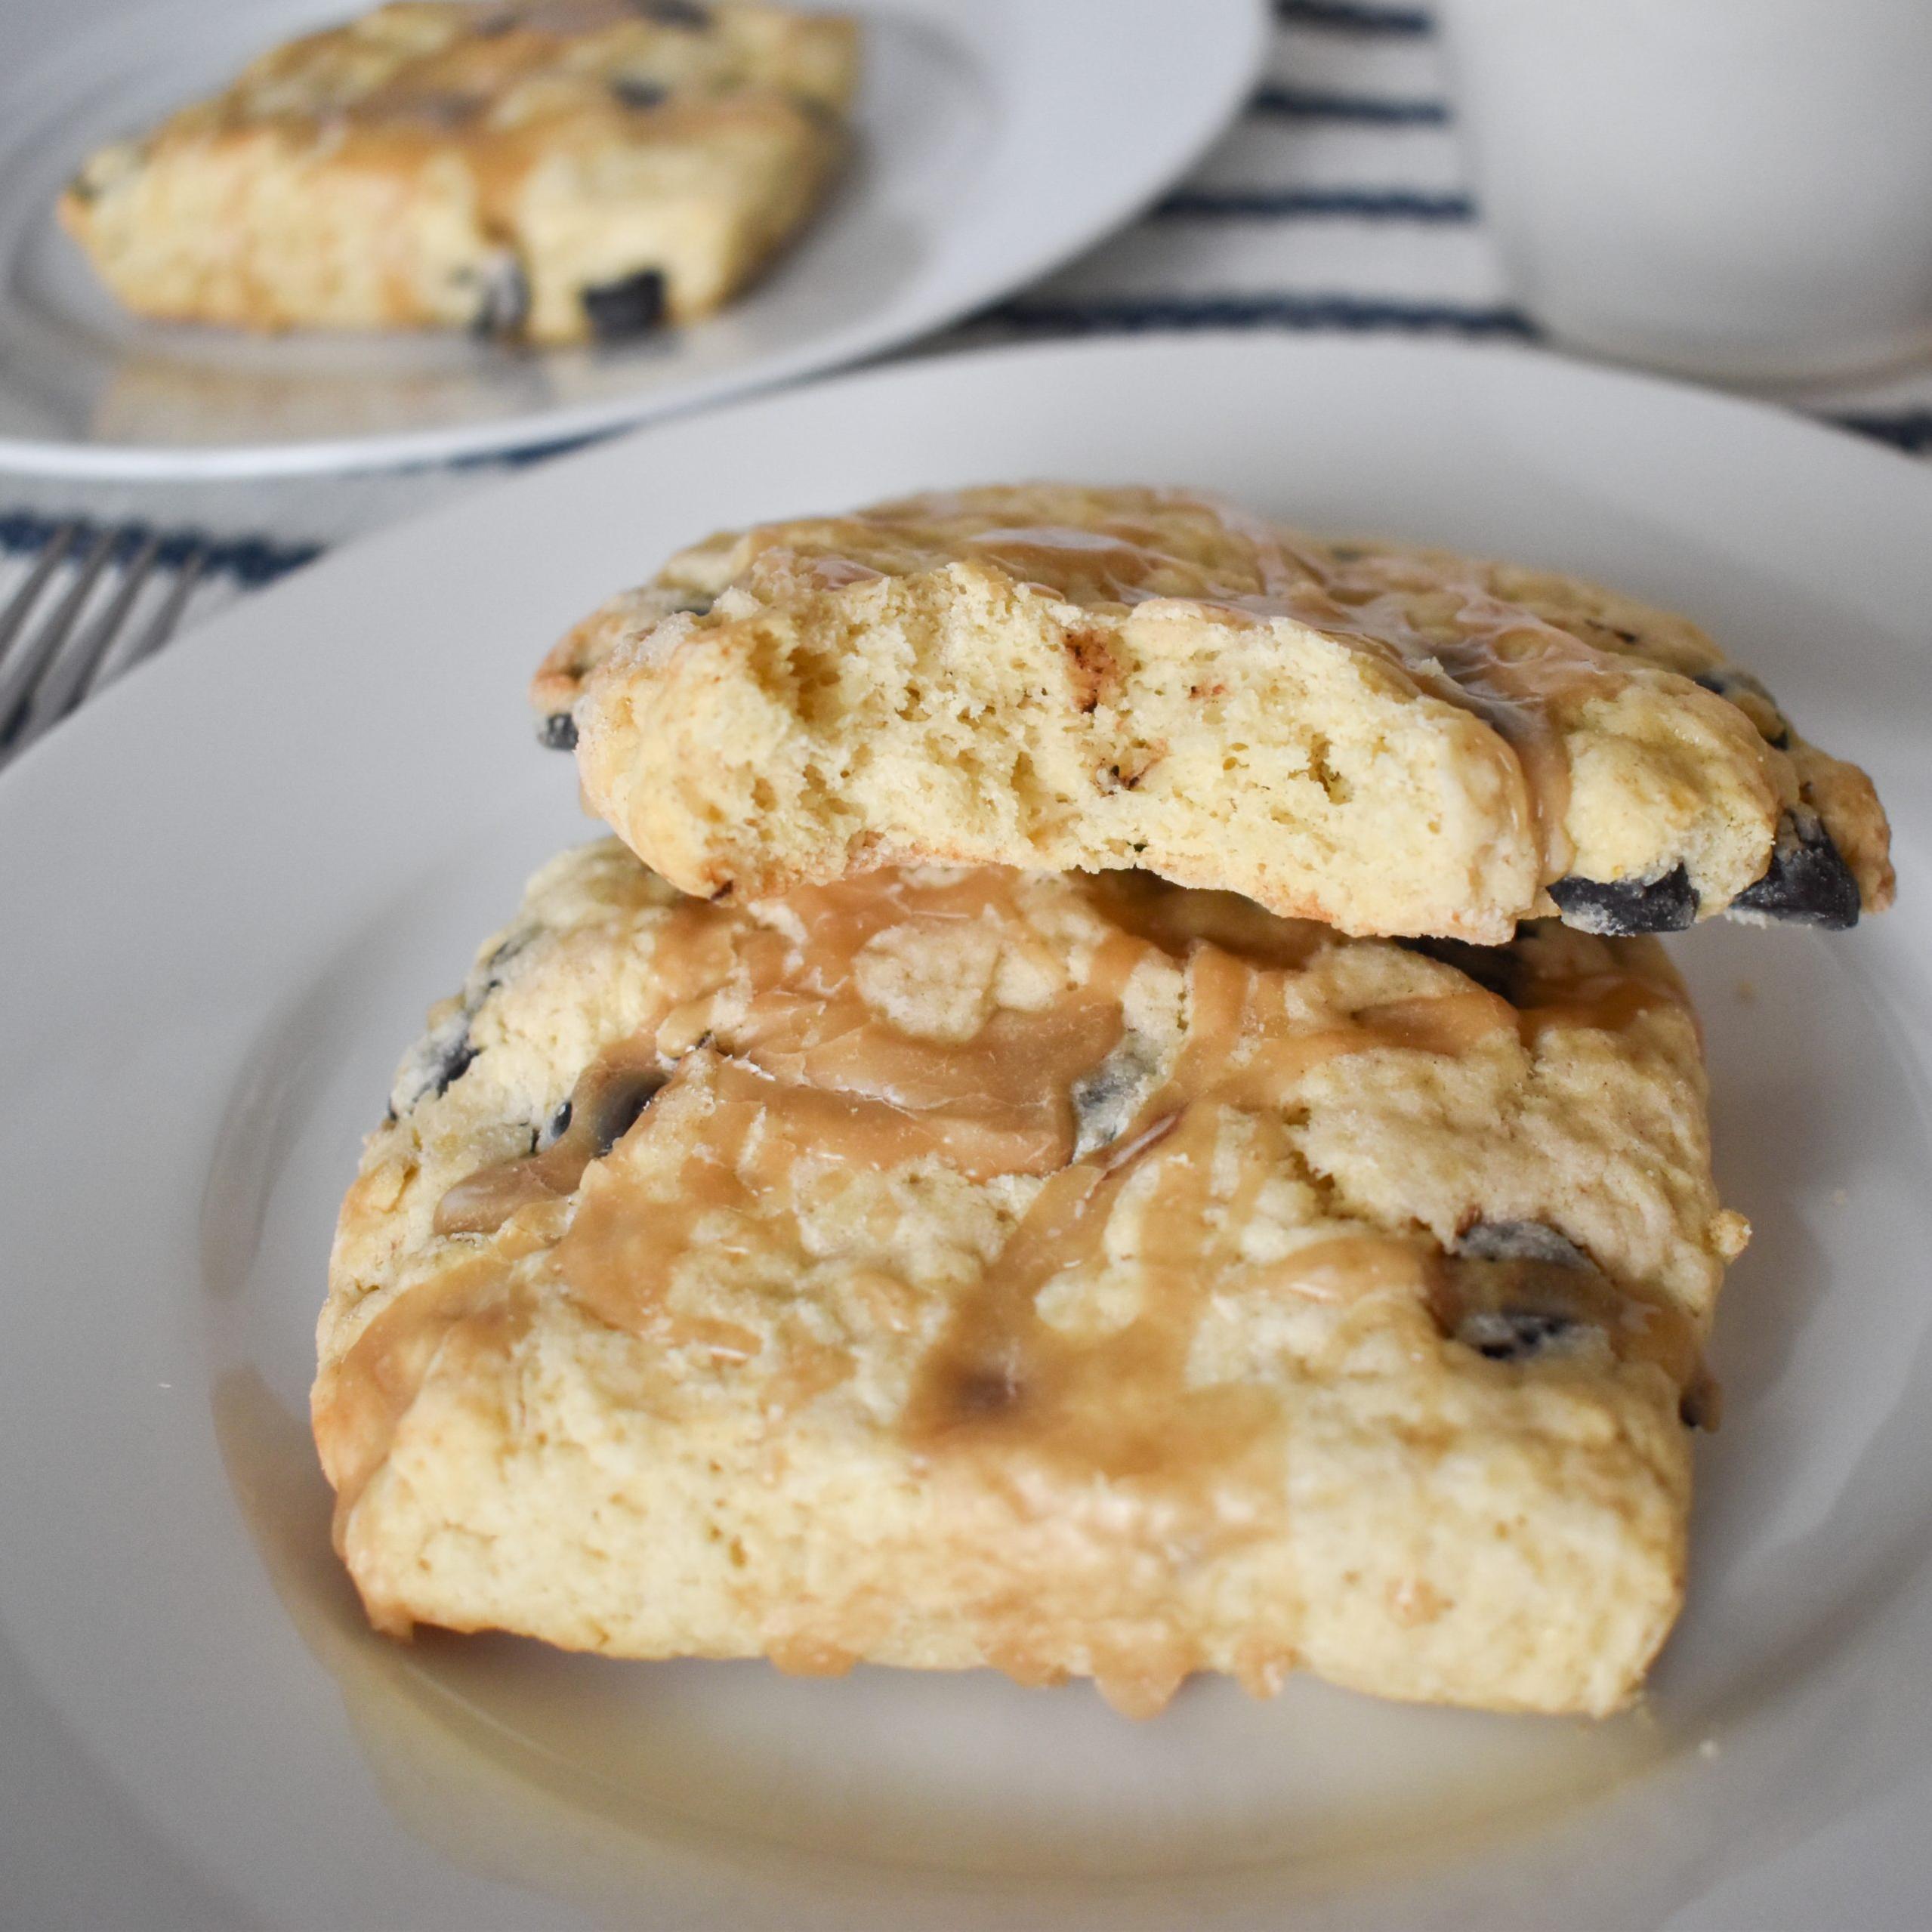  Are you a coffee lover? Try these scones!